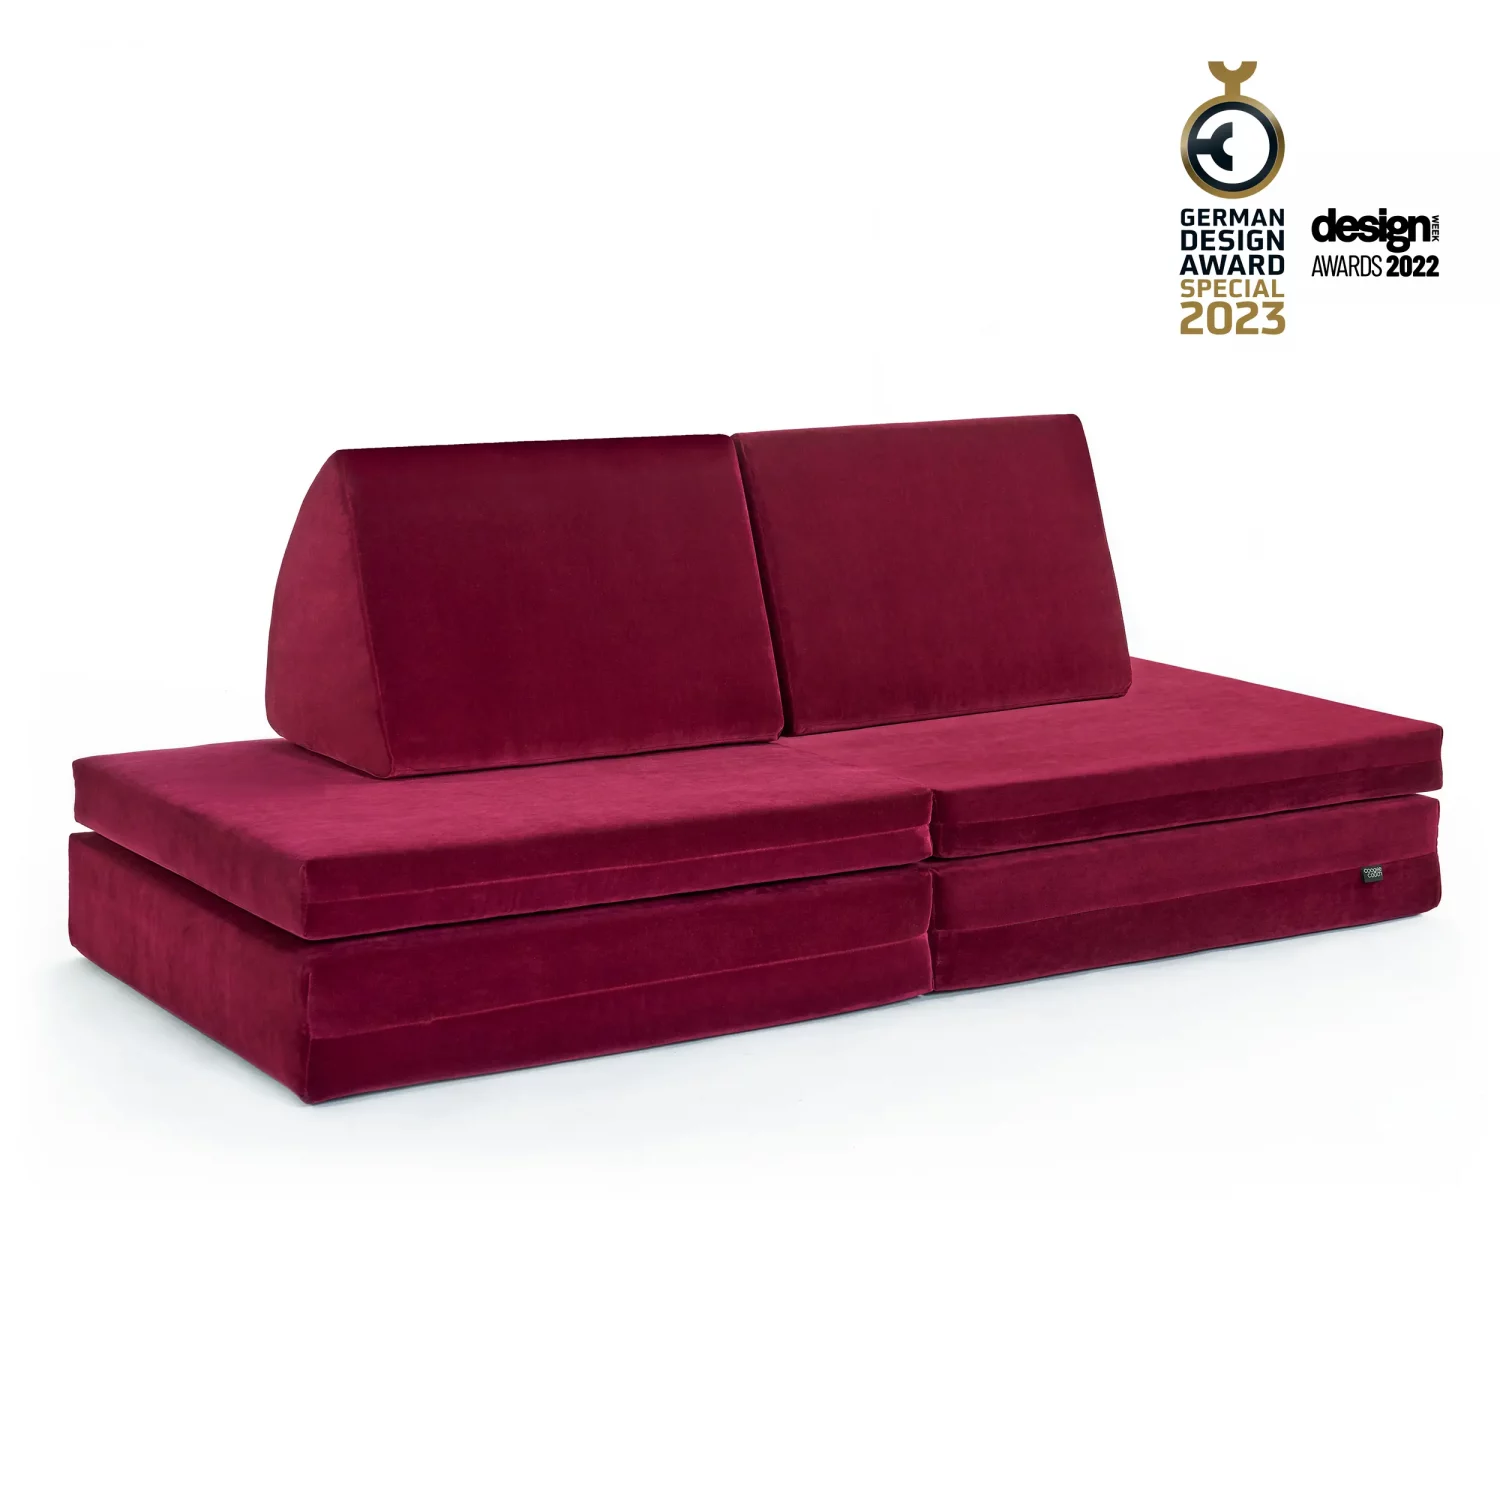 coogeecouch | Award | German Design Award 2023  | Kindersofa | Serie: bloomboom | Farbe: raspberry-red dunkelrot | Ansicht: Front schräg | made in Germany